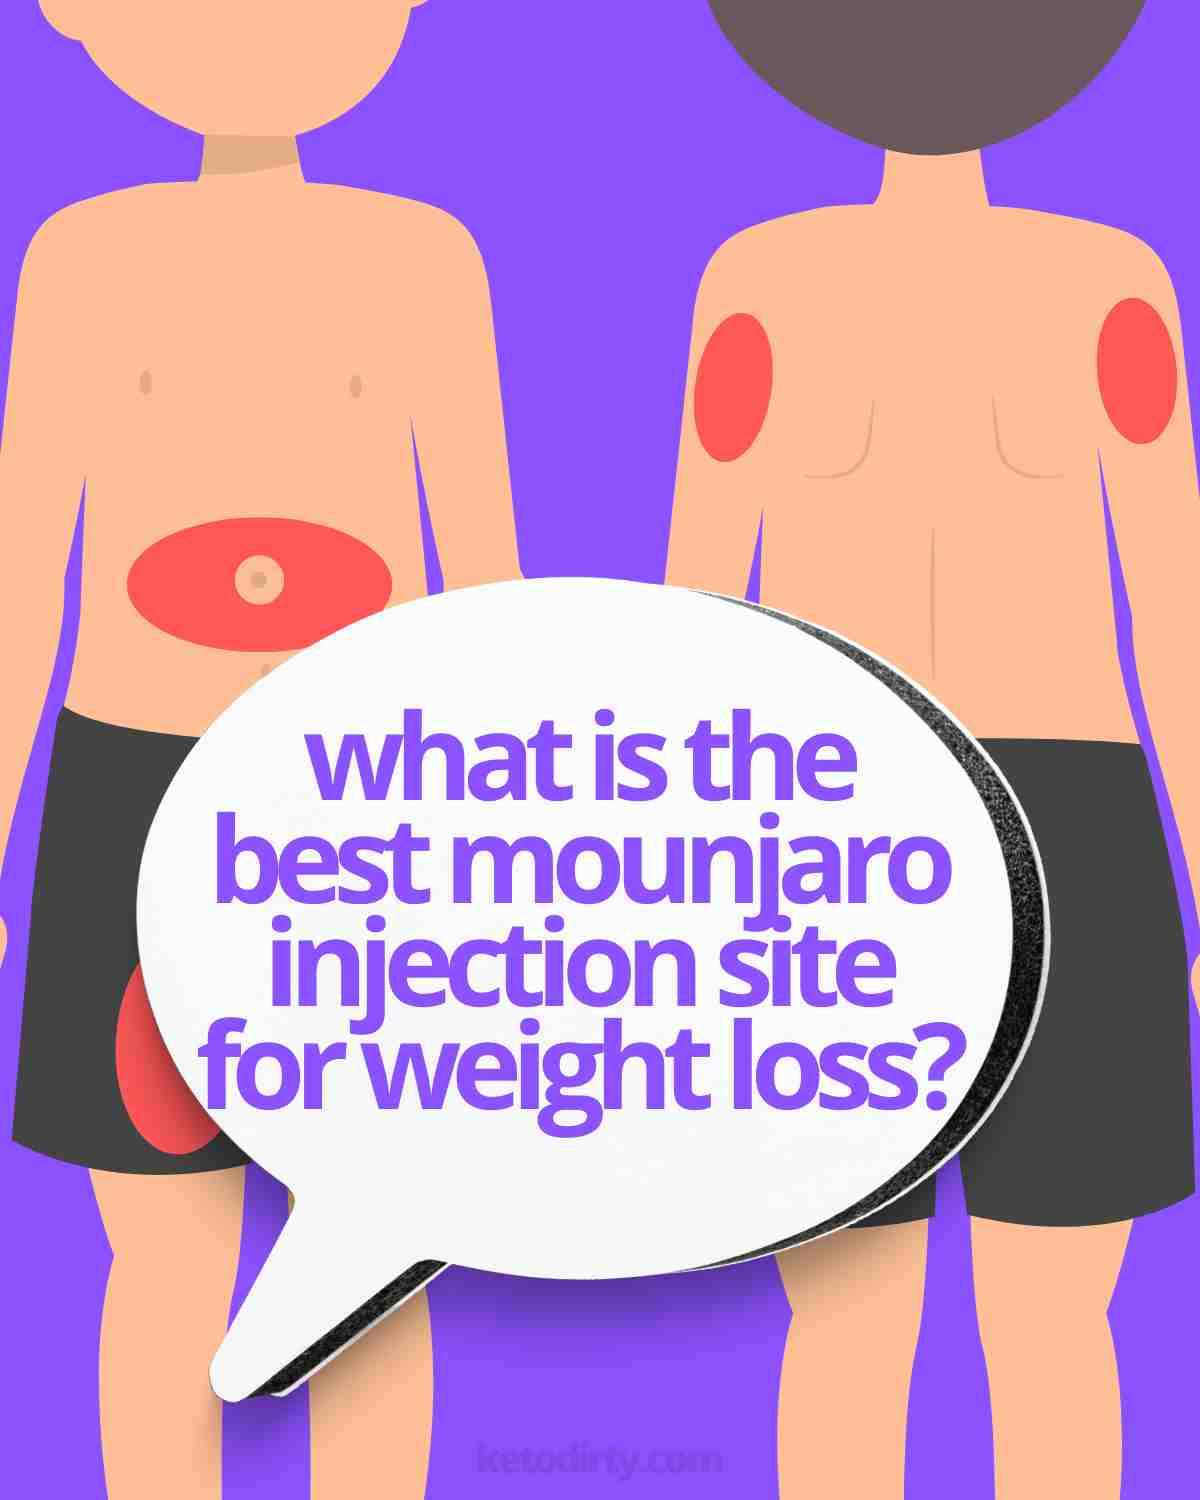 what is the best mounjaro injection site for weight loss?